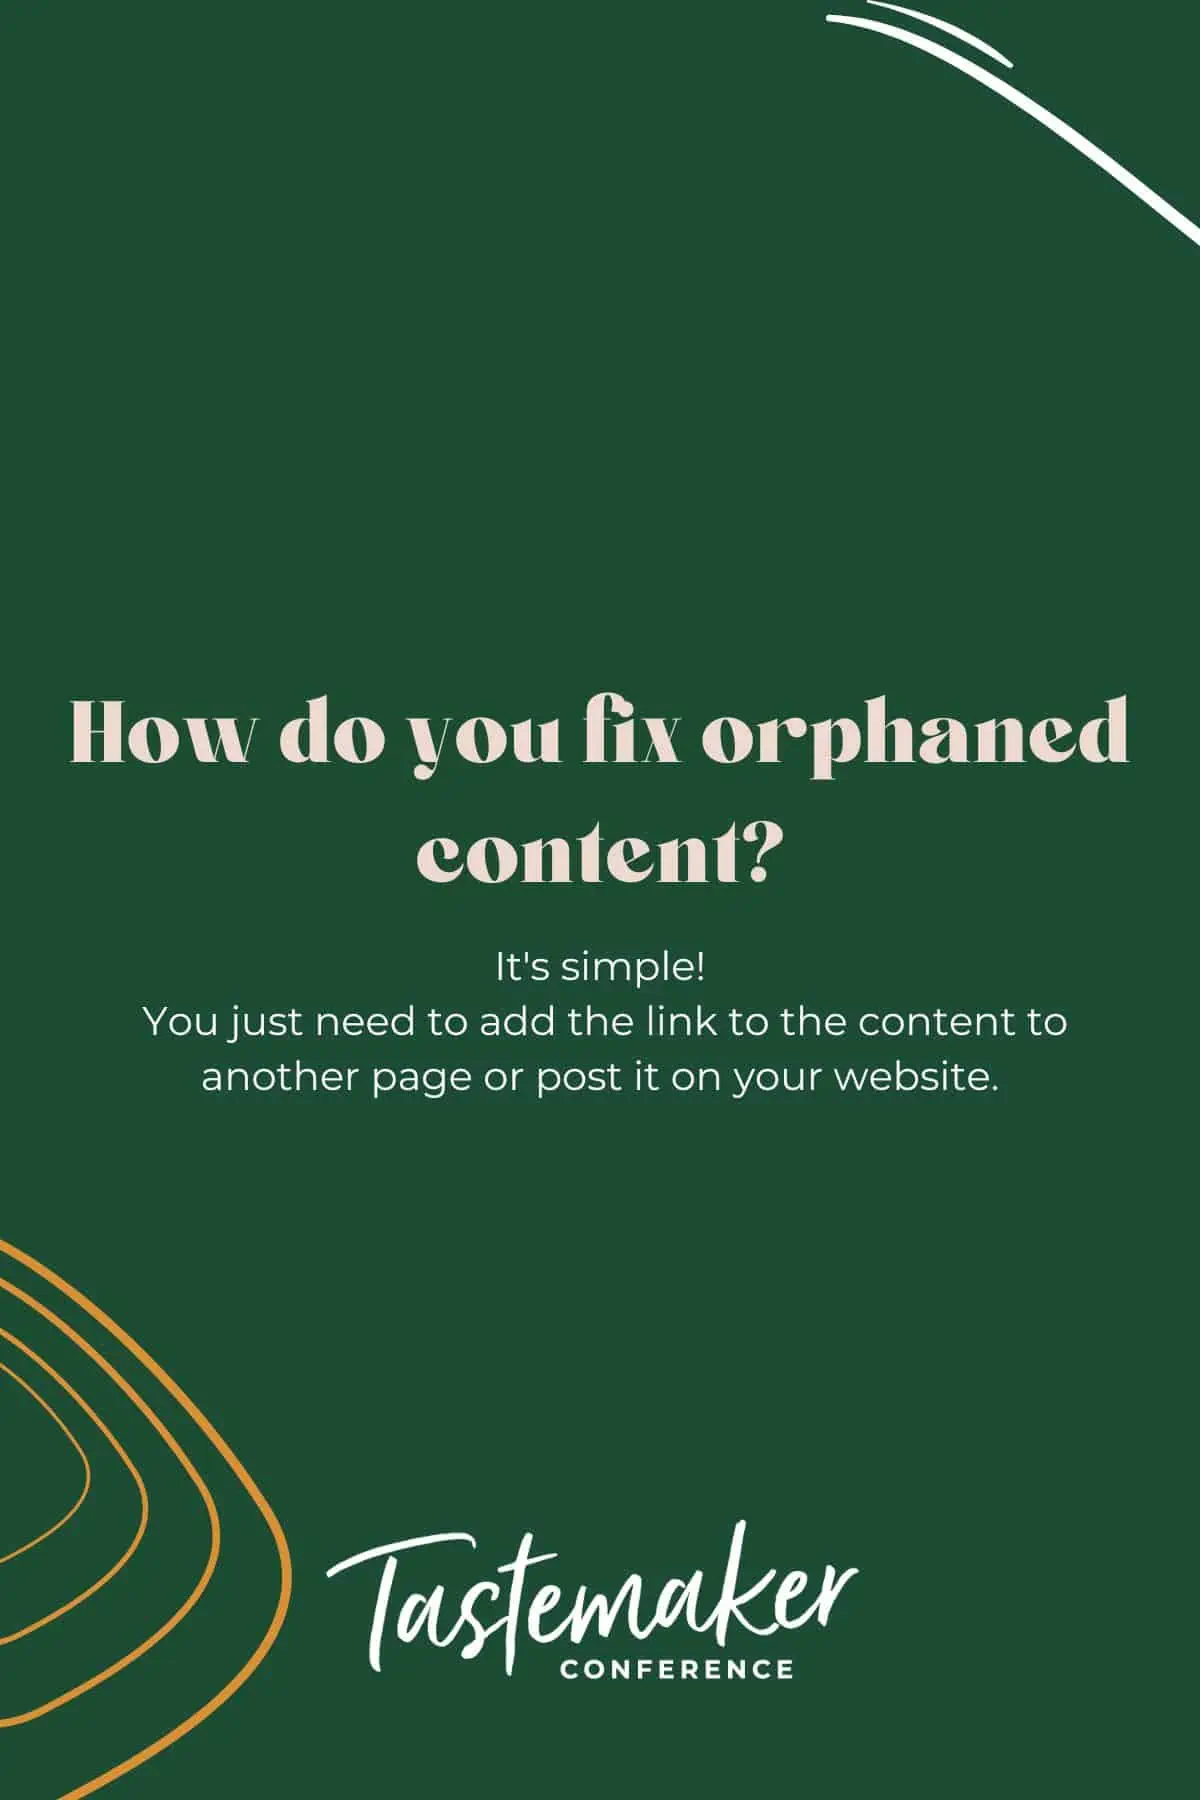 green graphic reading how do you fix orphaned content?